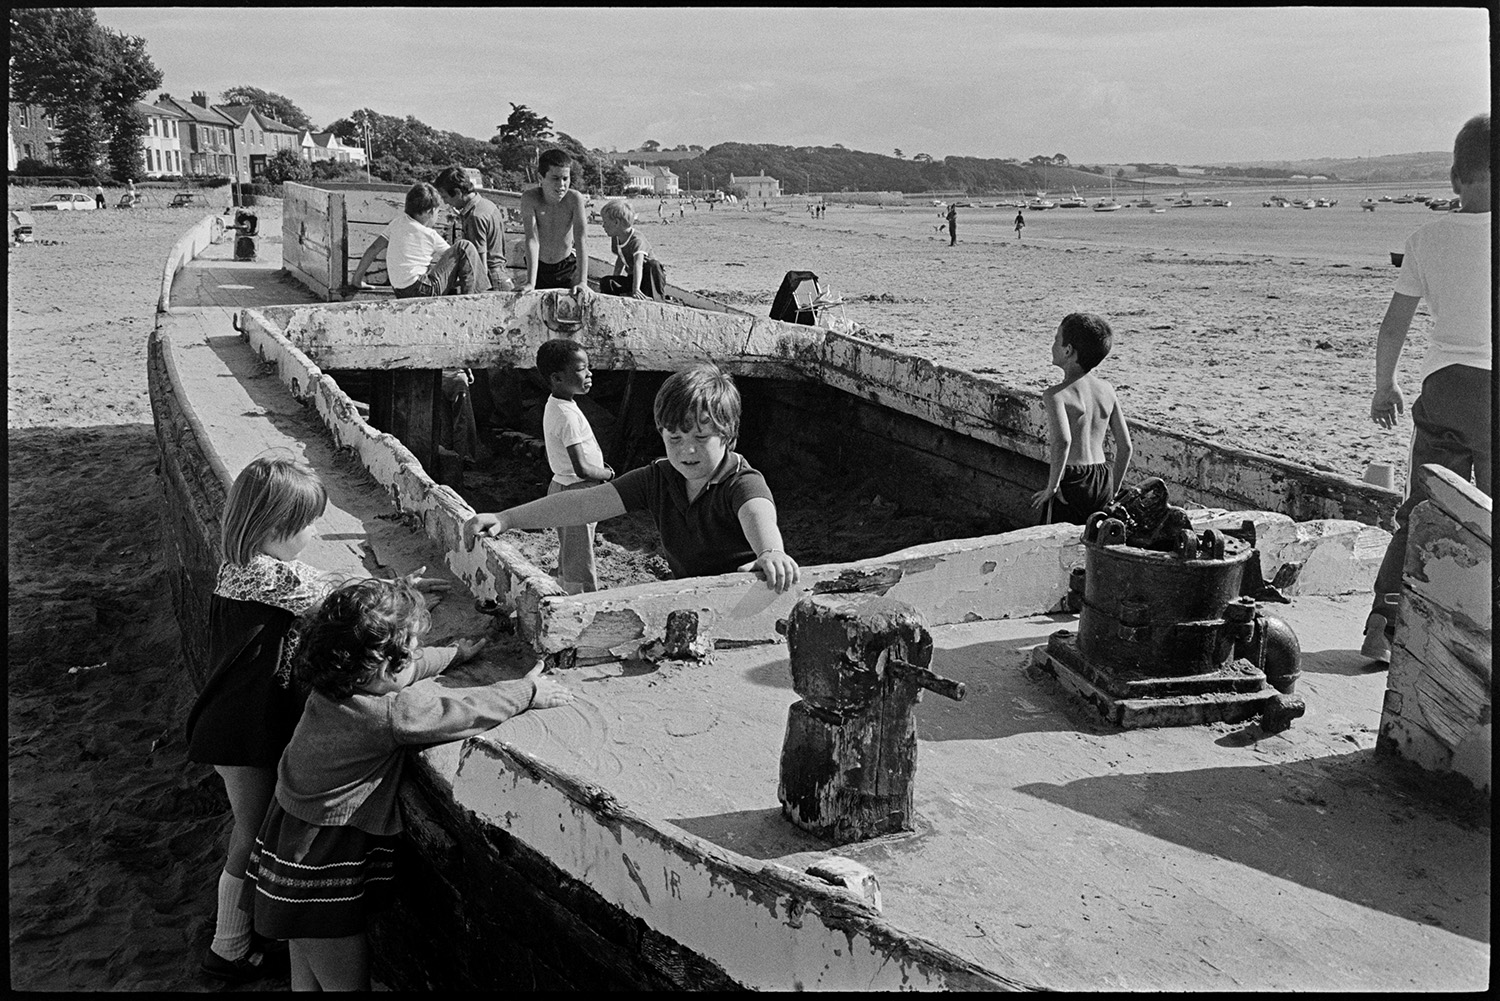 Children playing on beach, kite. Abandoned barge. 
[Children playing on an beached barge which has been abandoned, on the beach at Instow. Boats and buildings are visible in the background along the coastline.]